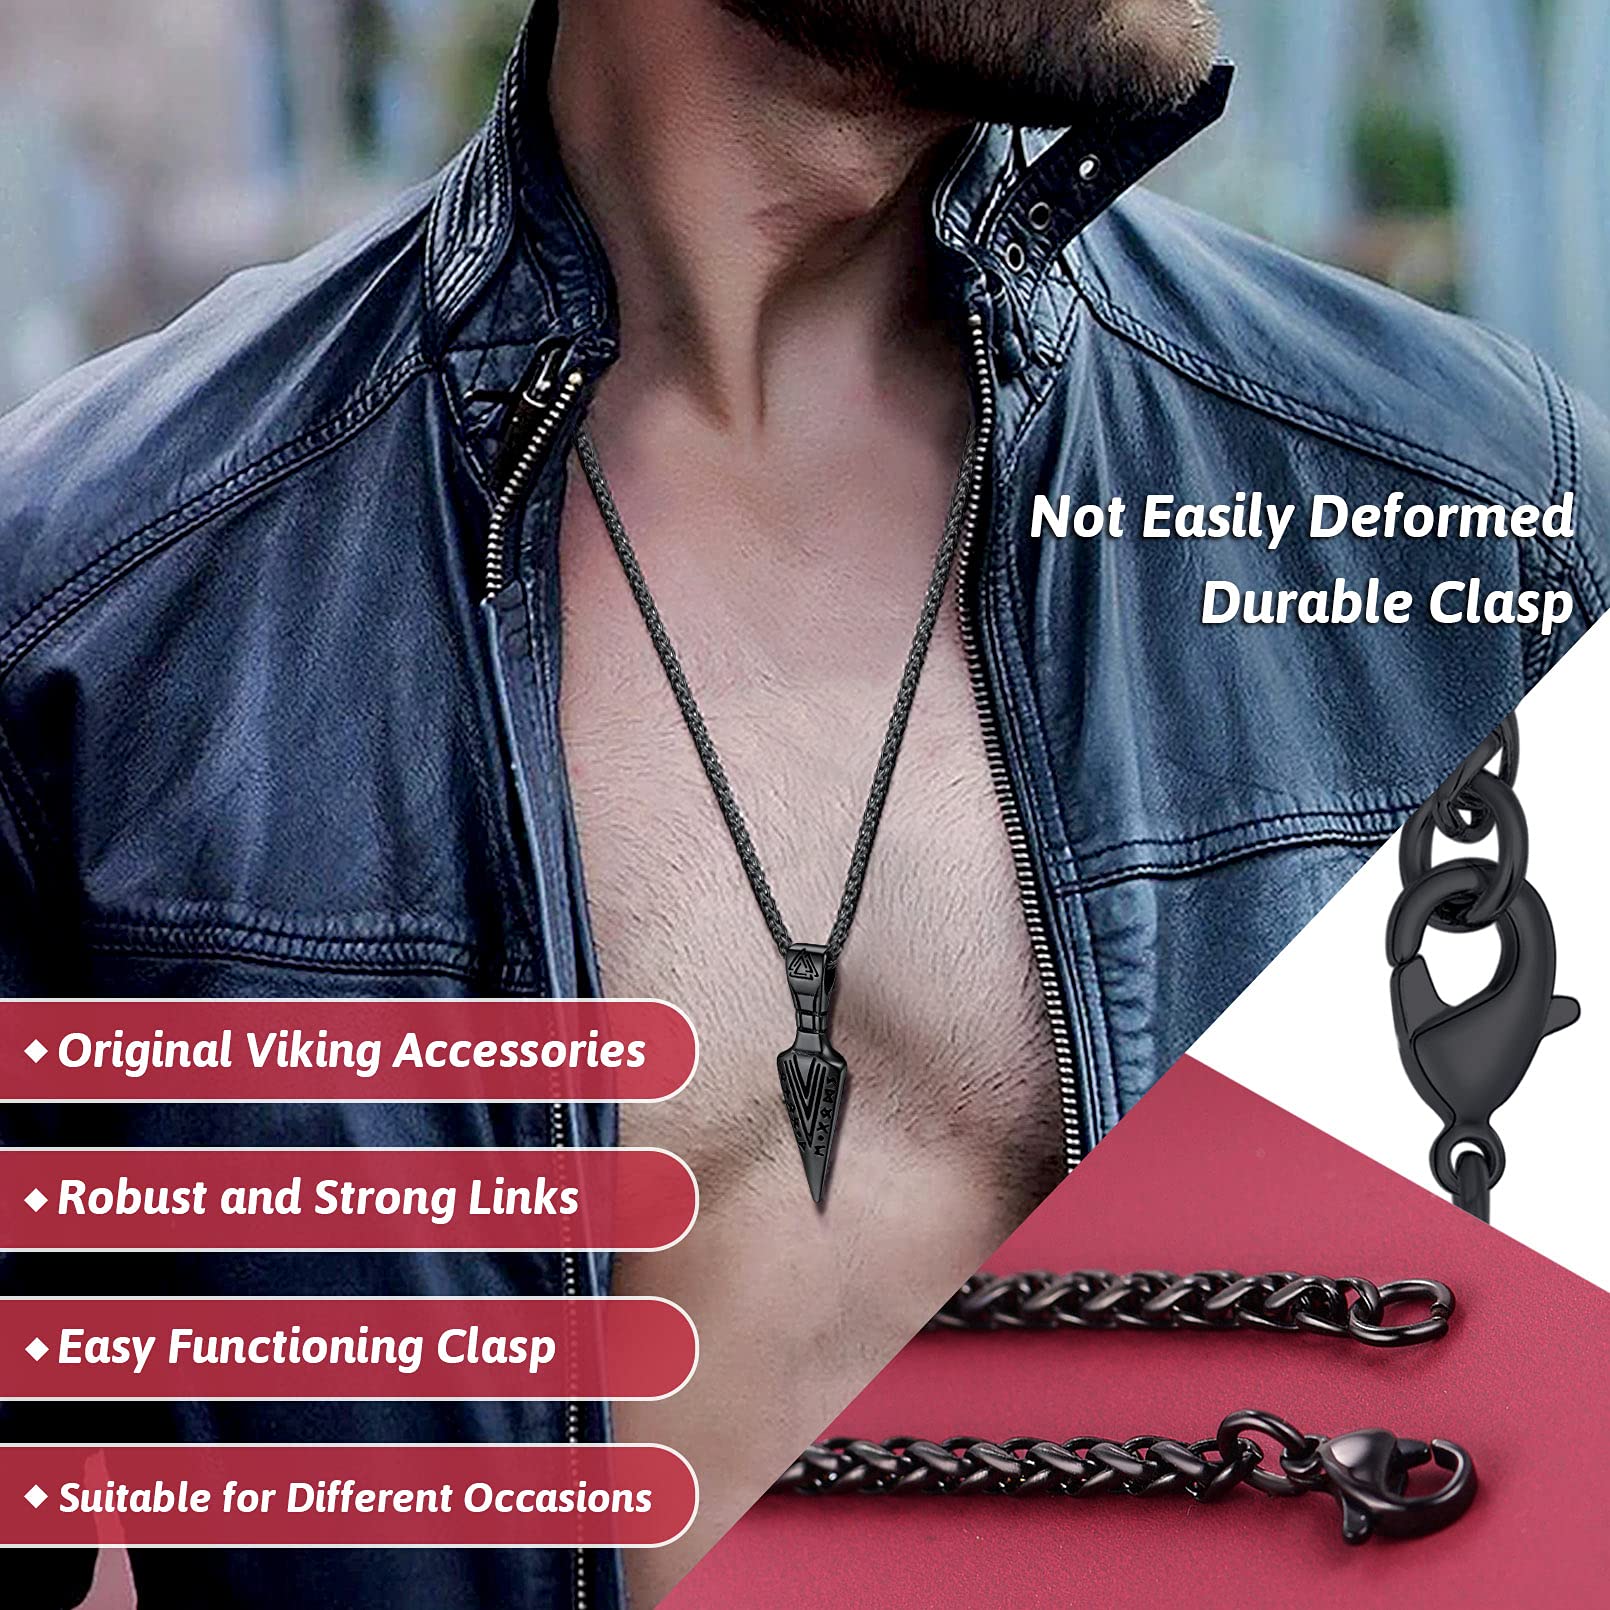 FaithHeart Norse Viking Odin Sword Gungnir Spear Head Pendant Necklace for Men Women with Sturdy Wheat Chain, Gift Packaging